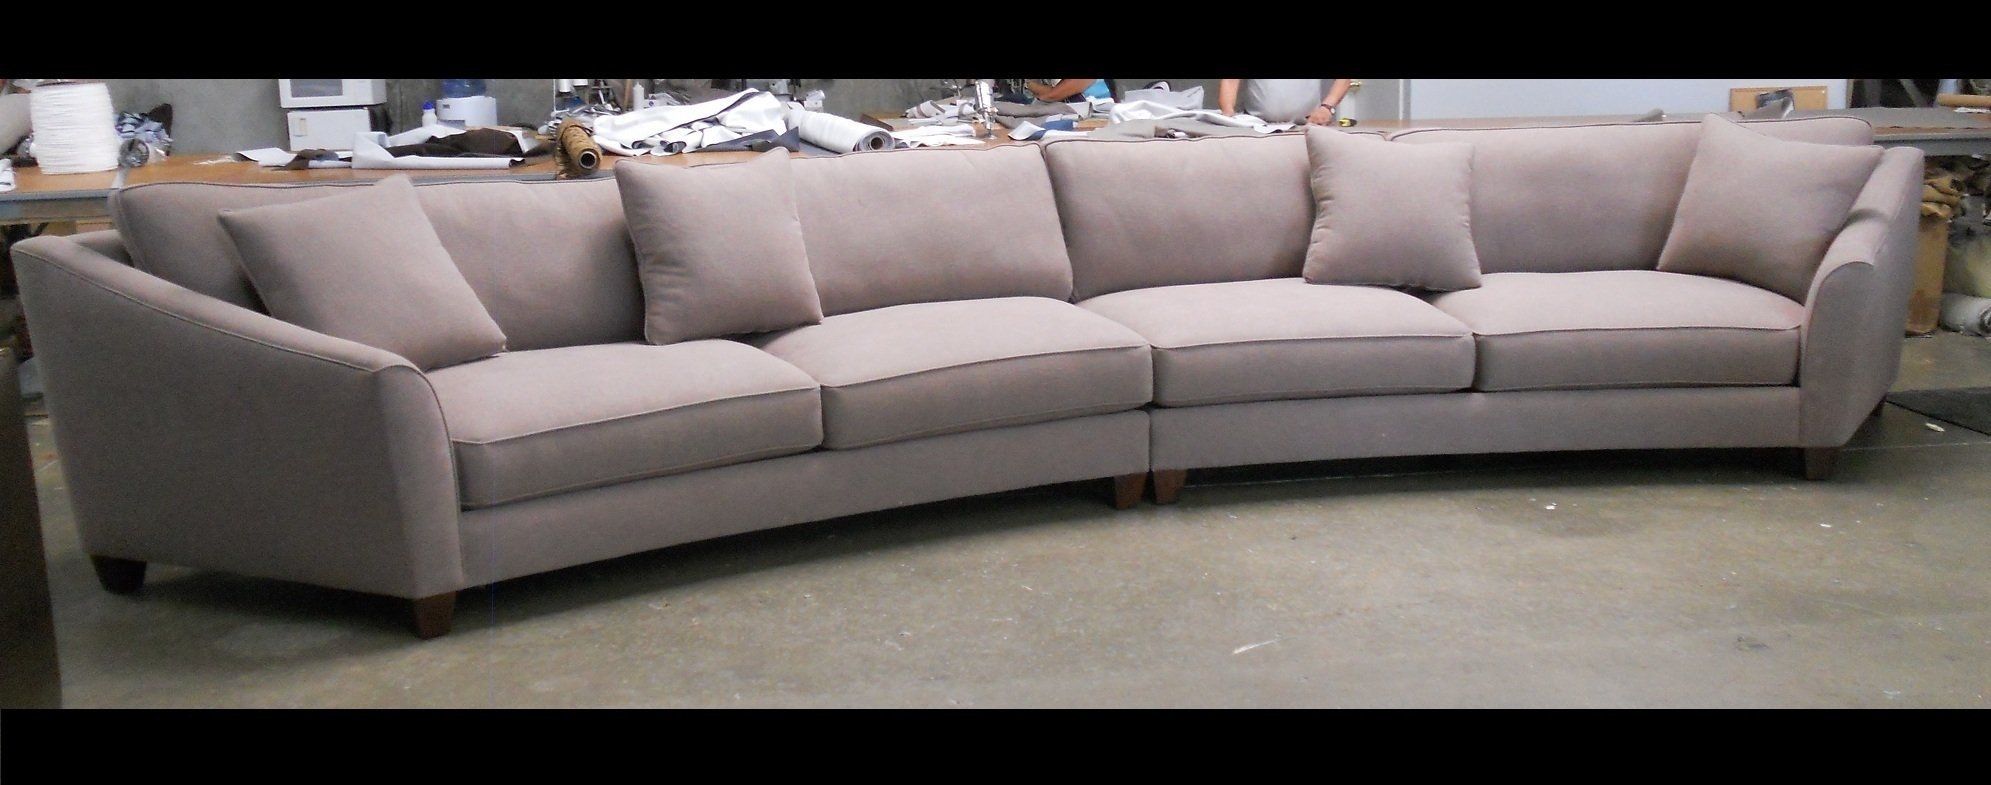 Curved Sectional Sofa Set Rich Comfortable Upholstered Fabric Throughout Circle Sectional Sofa (View 11 of 15)